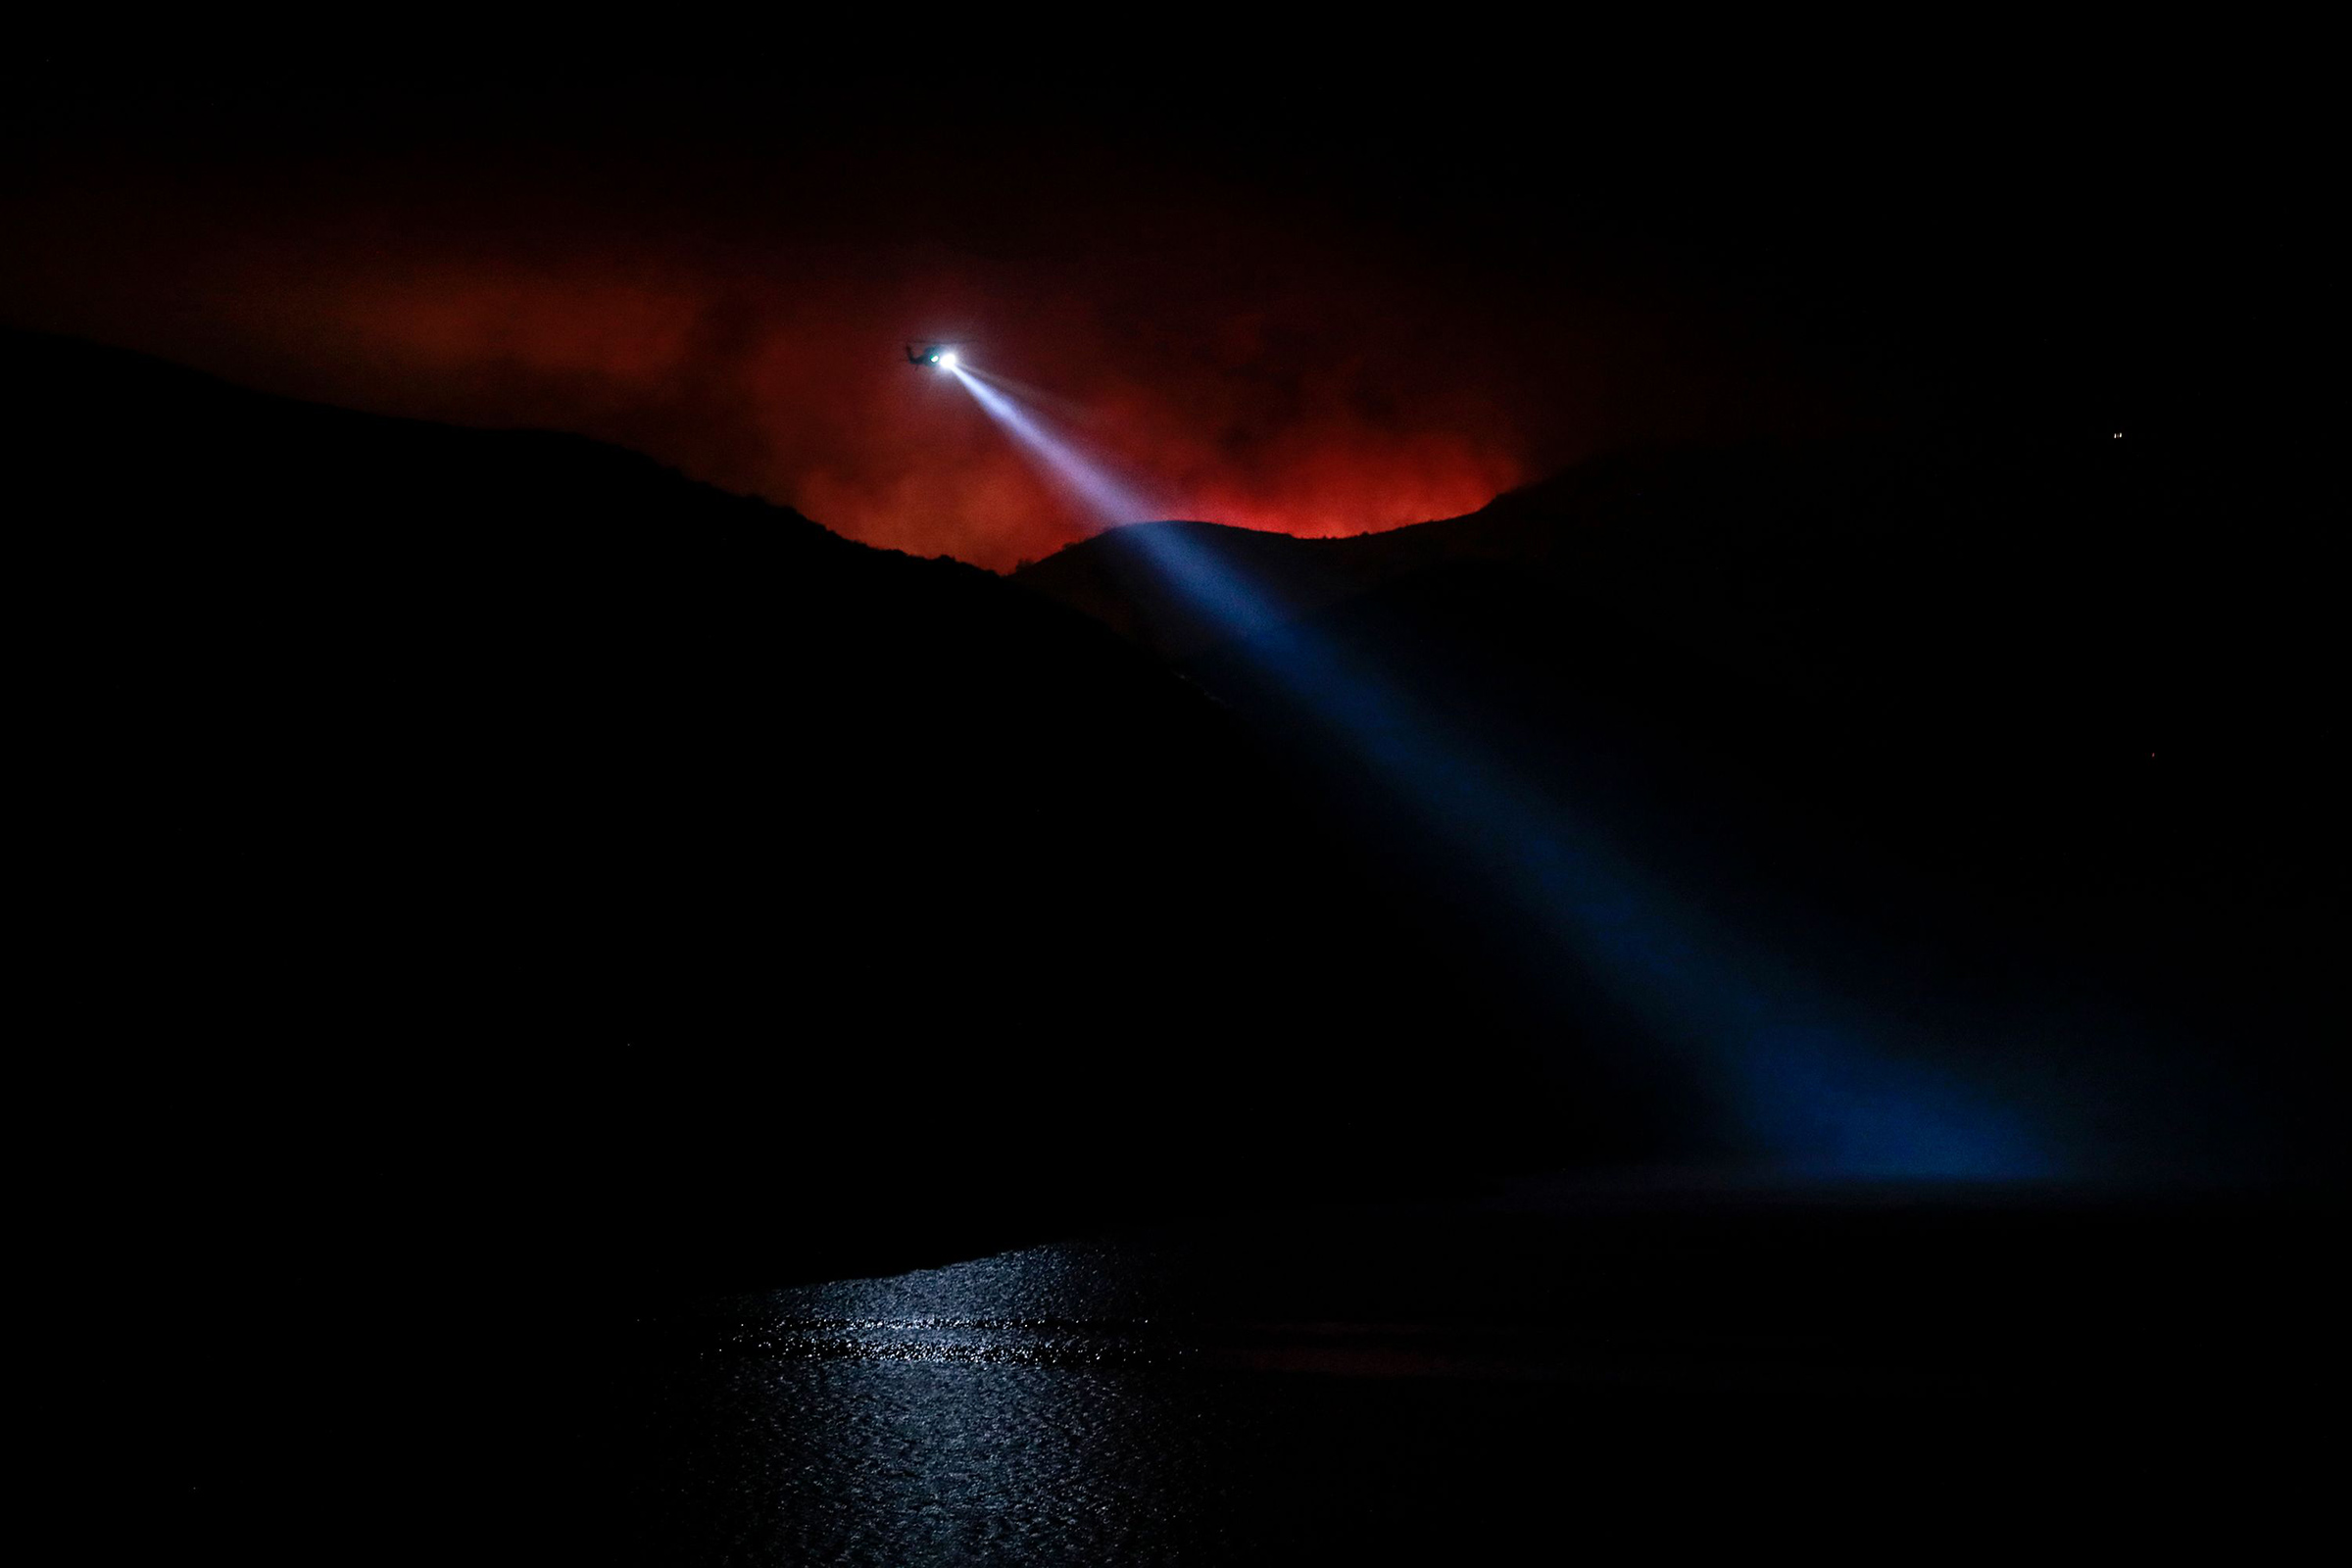 The night sky glows red from the Holser Fire in Piru, Calif., on Aug. 17, as a water-dropping helicopter works to slow the spread of flames. (Robert Gauthier—Los Angeles Times/Shutterstock)